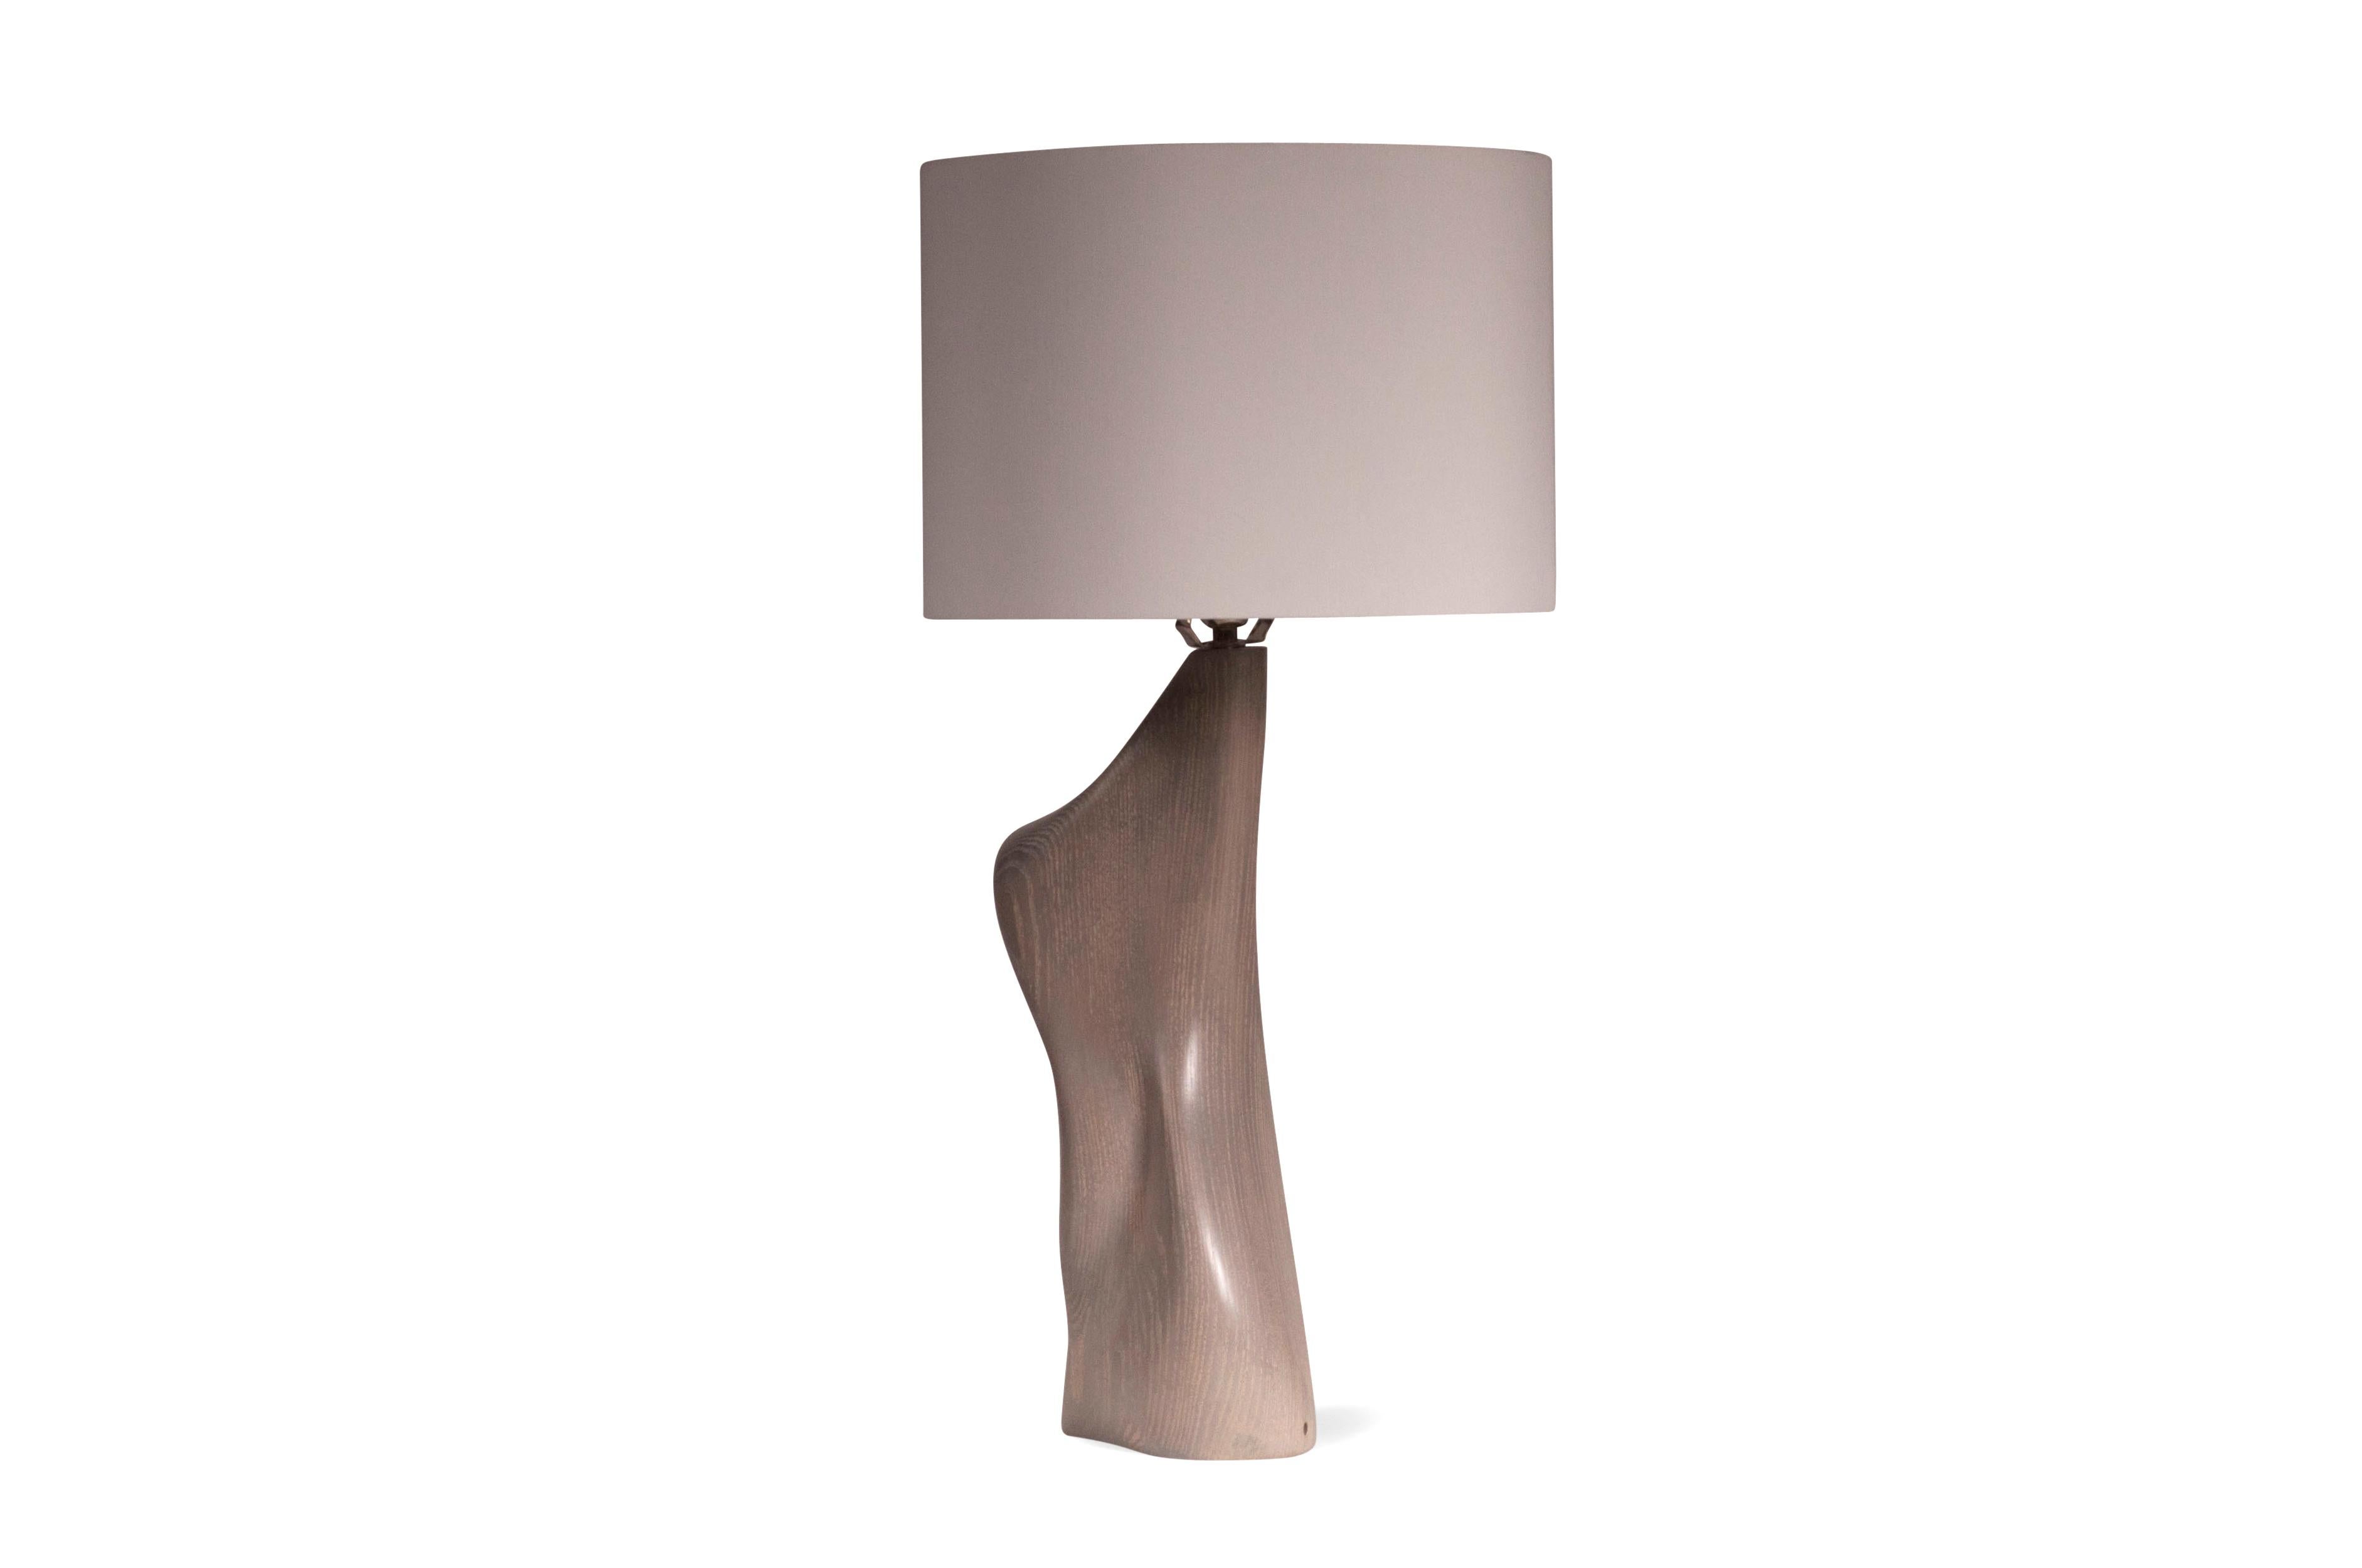 Helen table lamp is a organic shaped table lamp with antique grey finish.
Dimension of the table lamp is 8